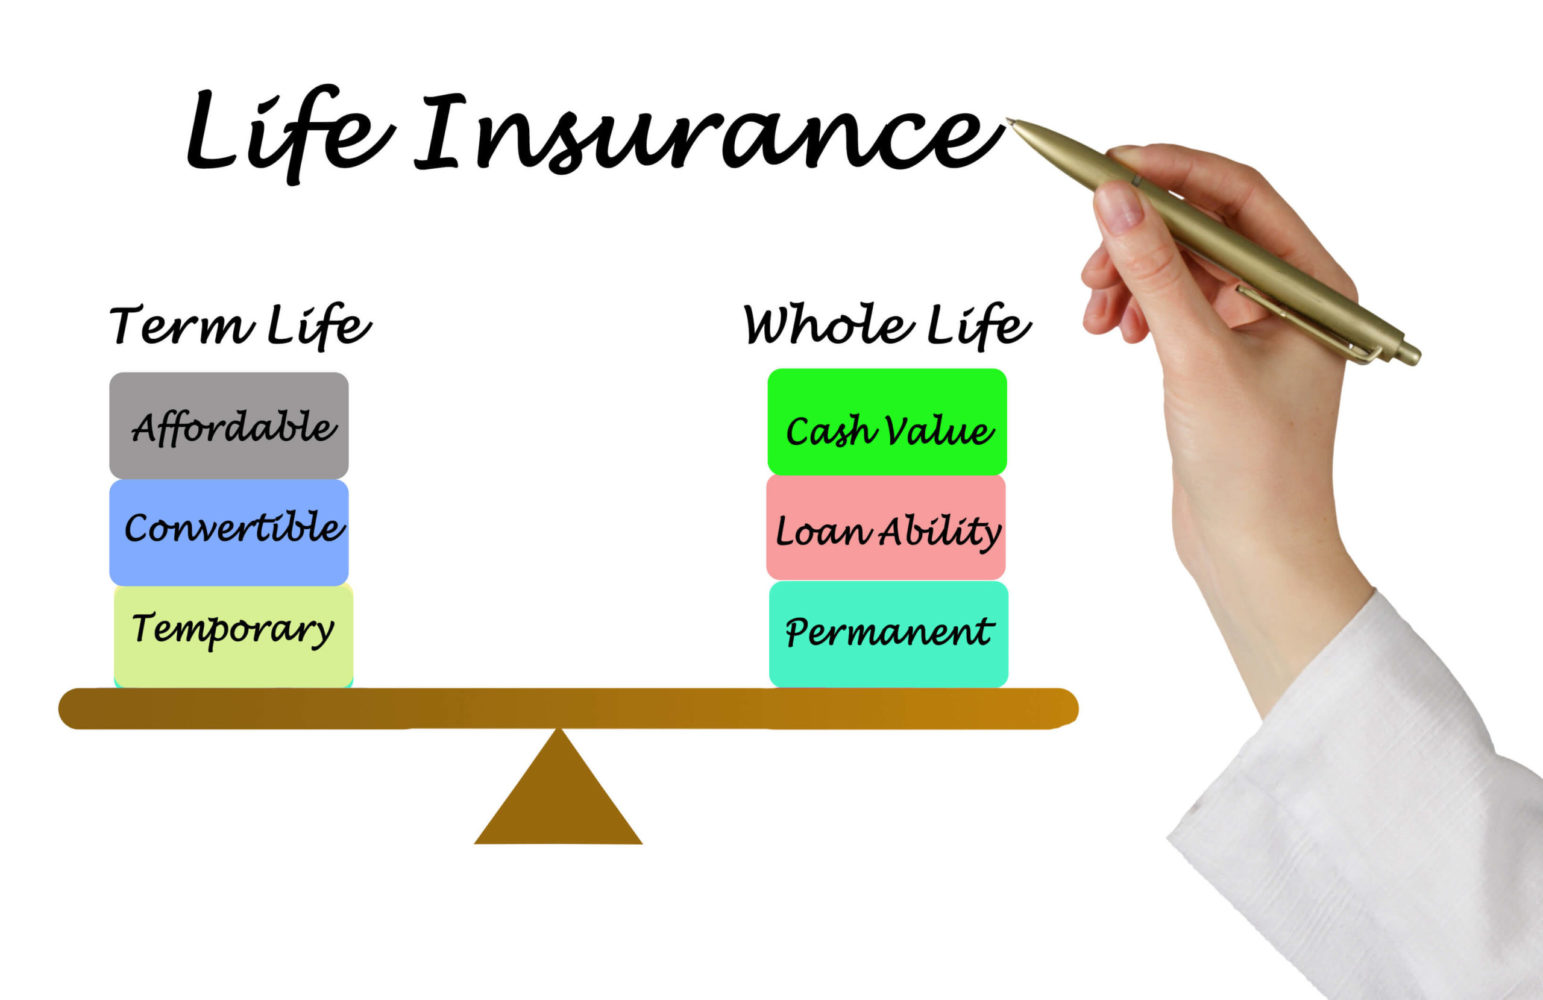 What Is The Main Disadvantage Of Having Whole Life Insurance?